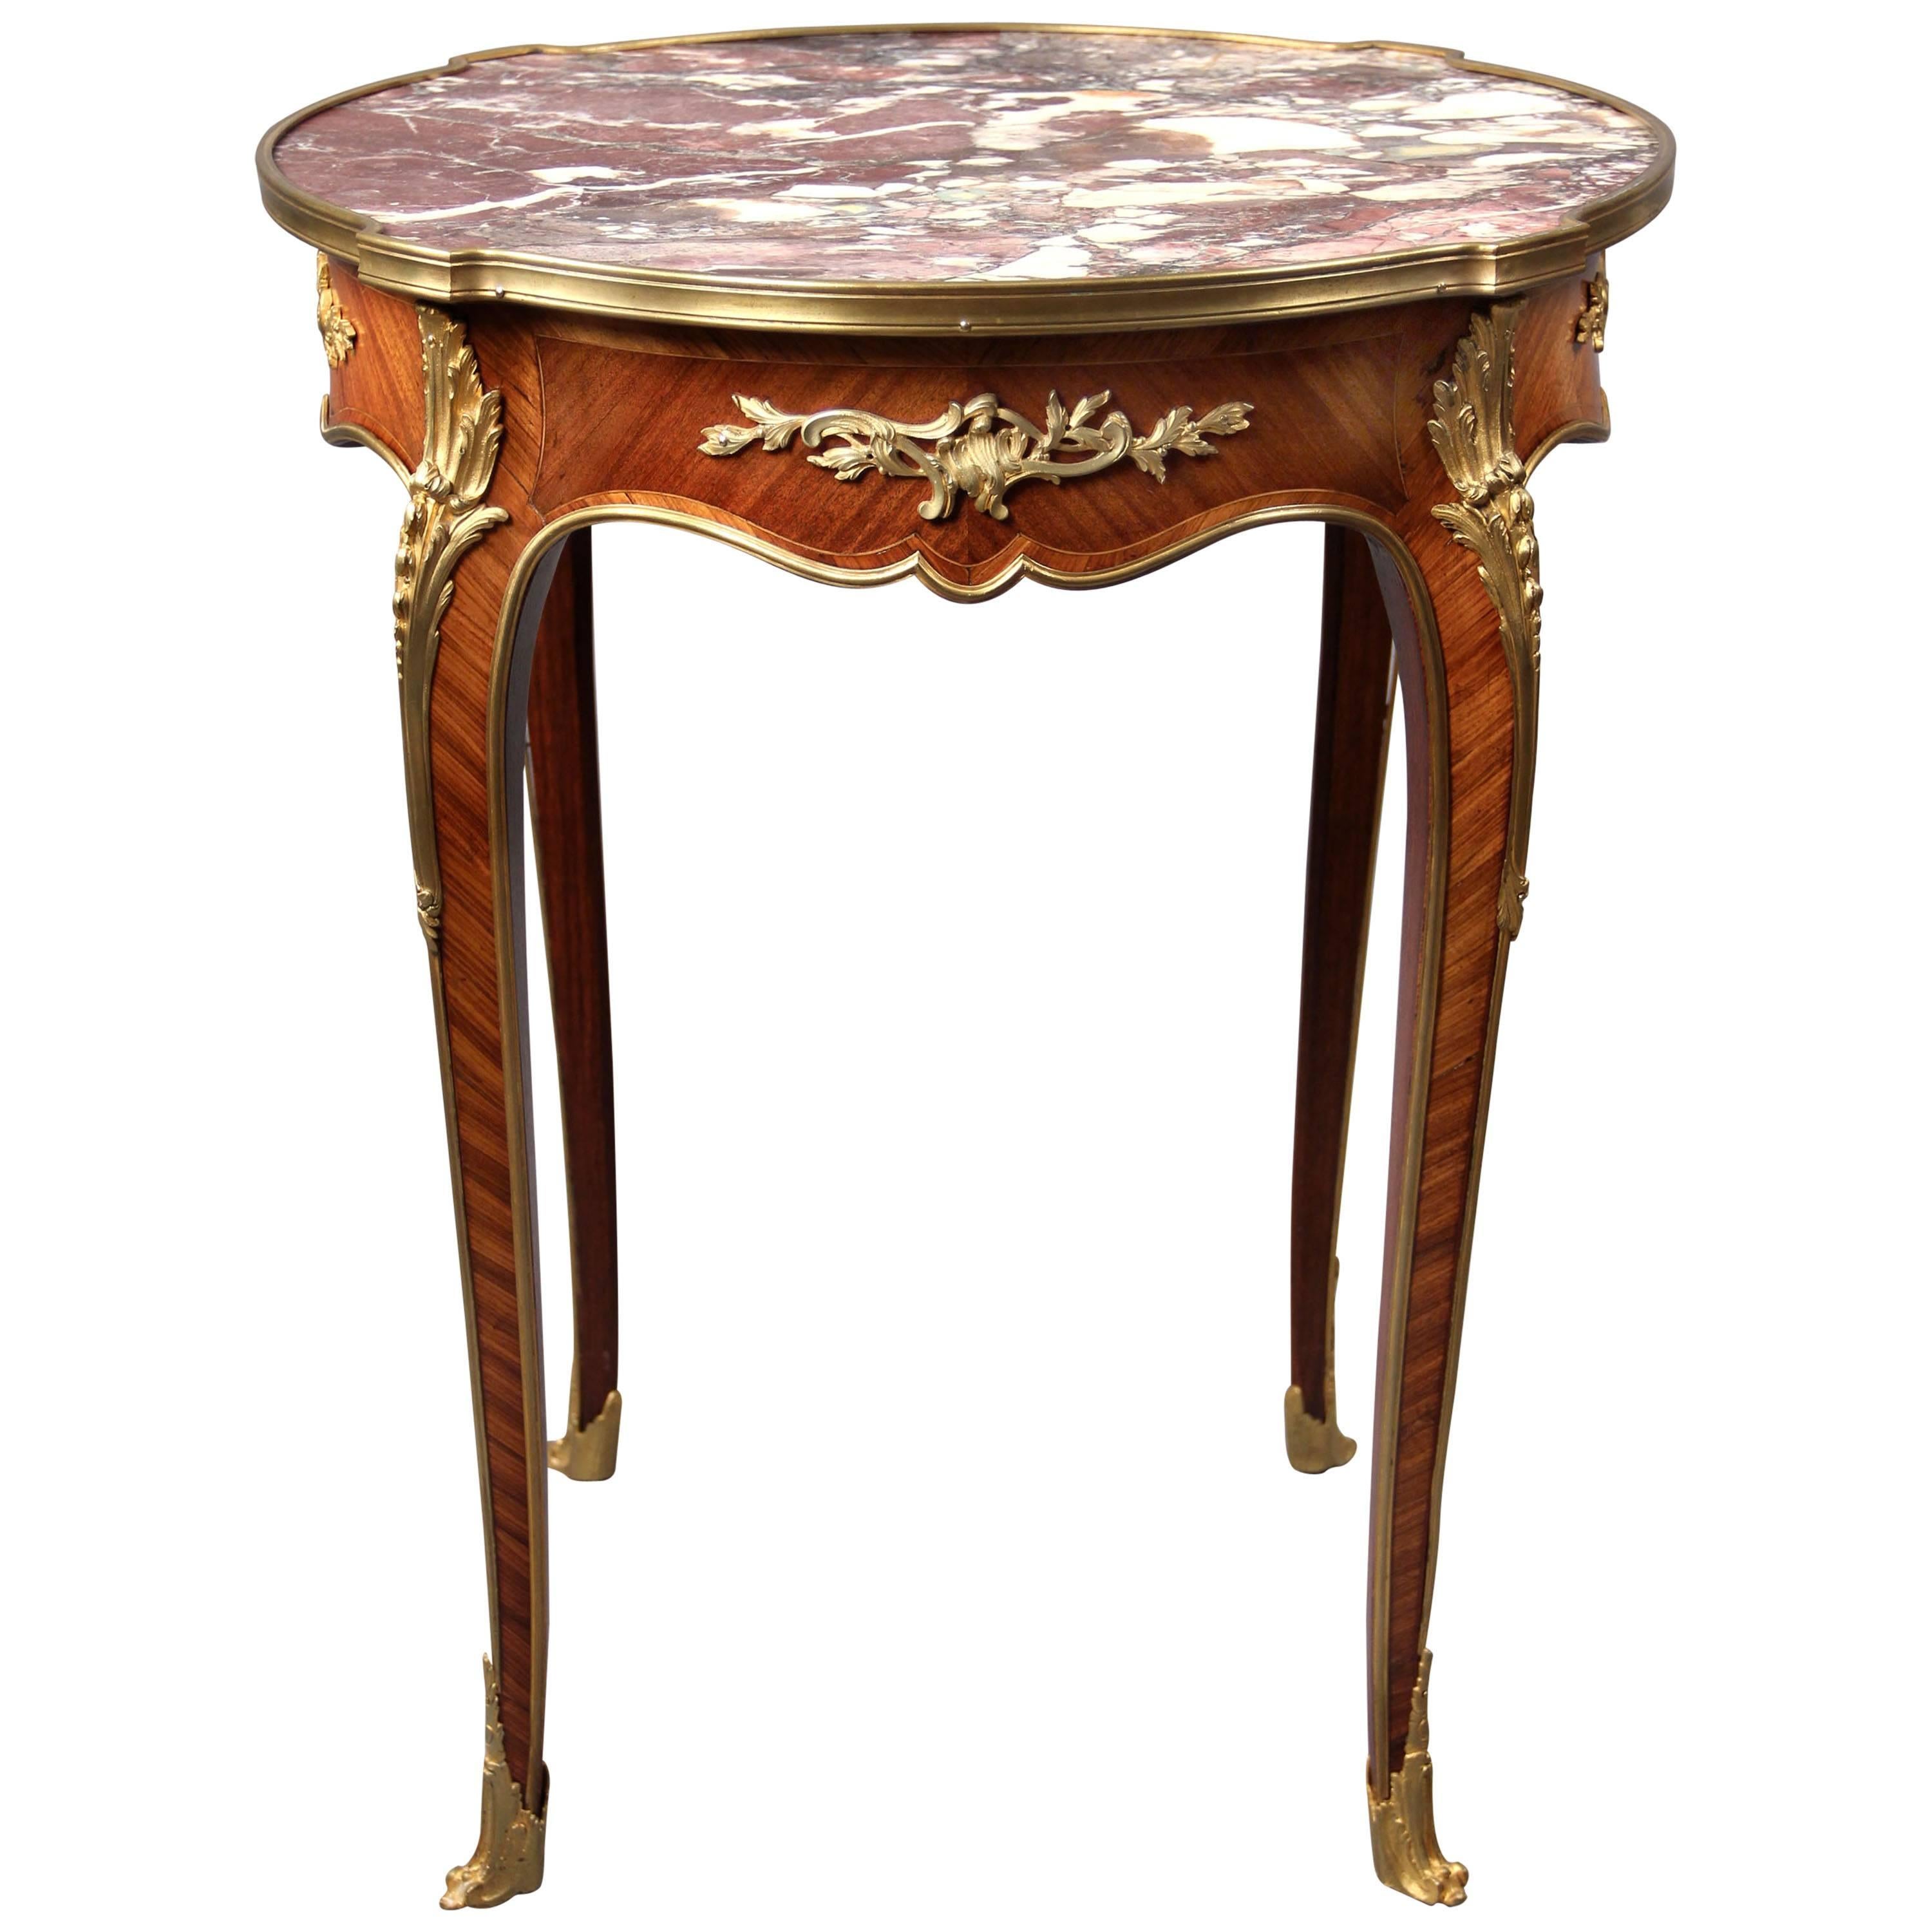 Late 19th Century Gilt Bronze-Mounted Marble-Top Lamp Table